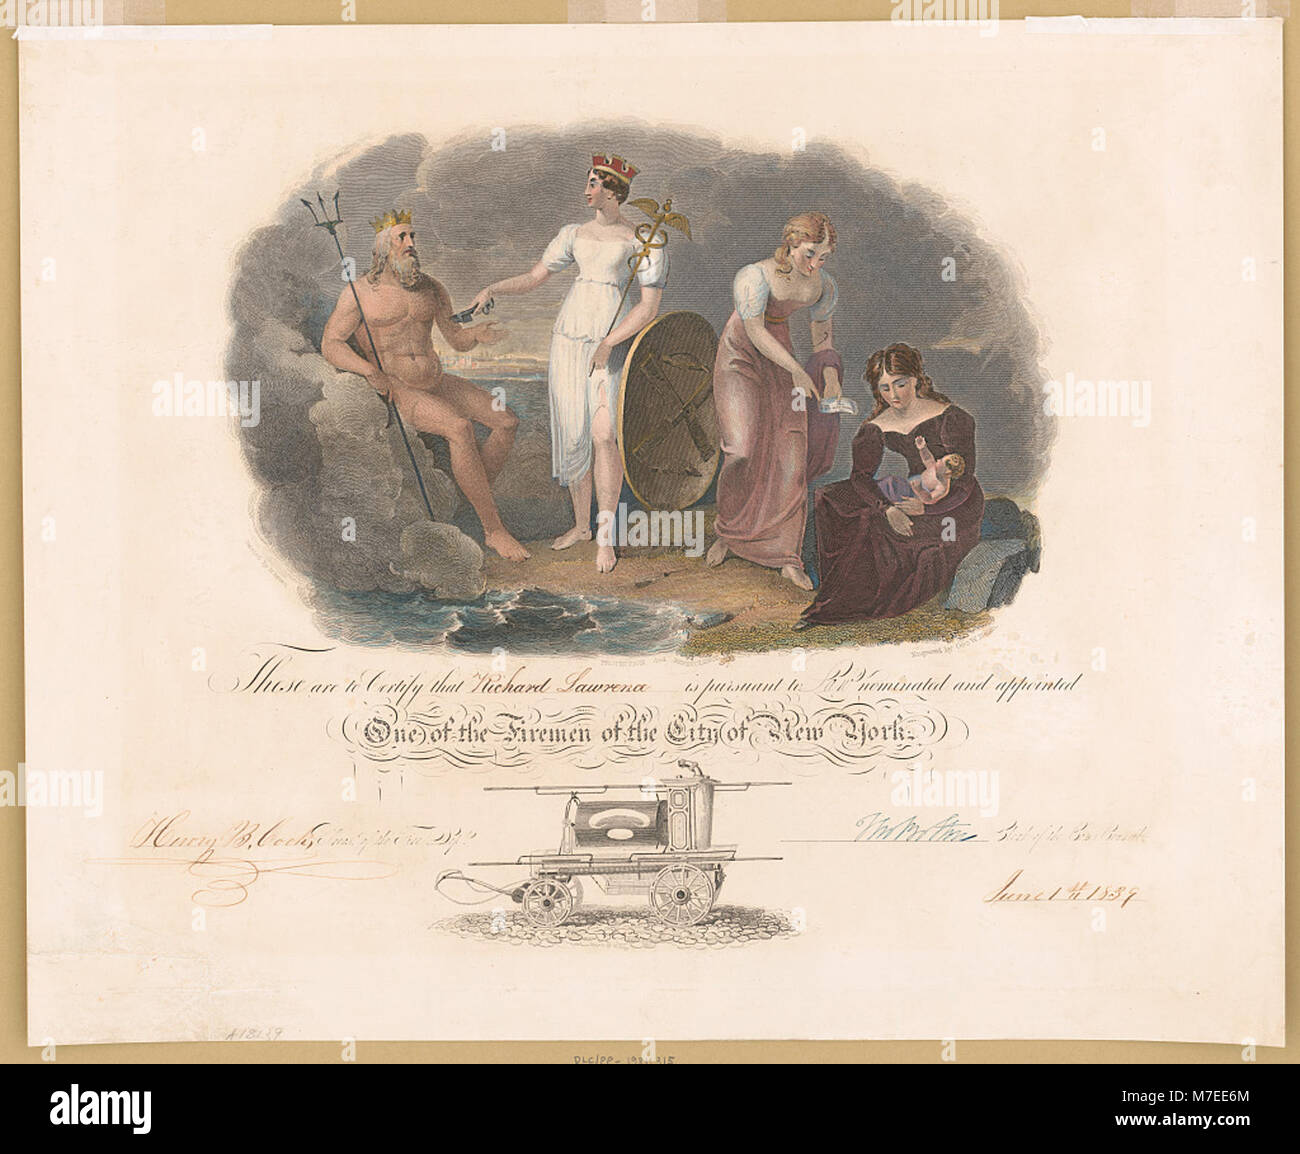 These are to certify that Richard Lawrence is pursuant to law nominated and appointed one of the fireman of the City of New York - painted by H. Inman ; engraved by Geo. W. Hatch. LCCN2018645785 Stock Photo